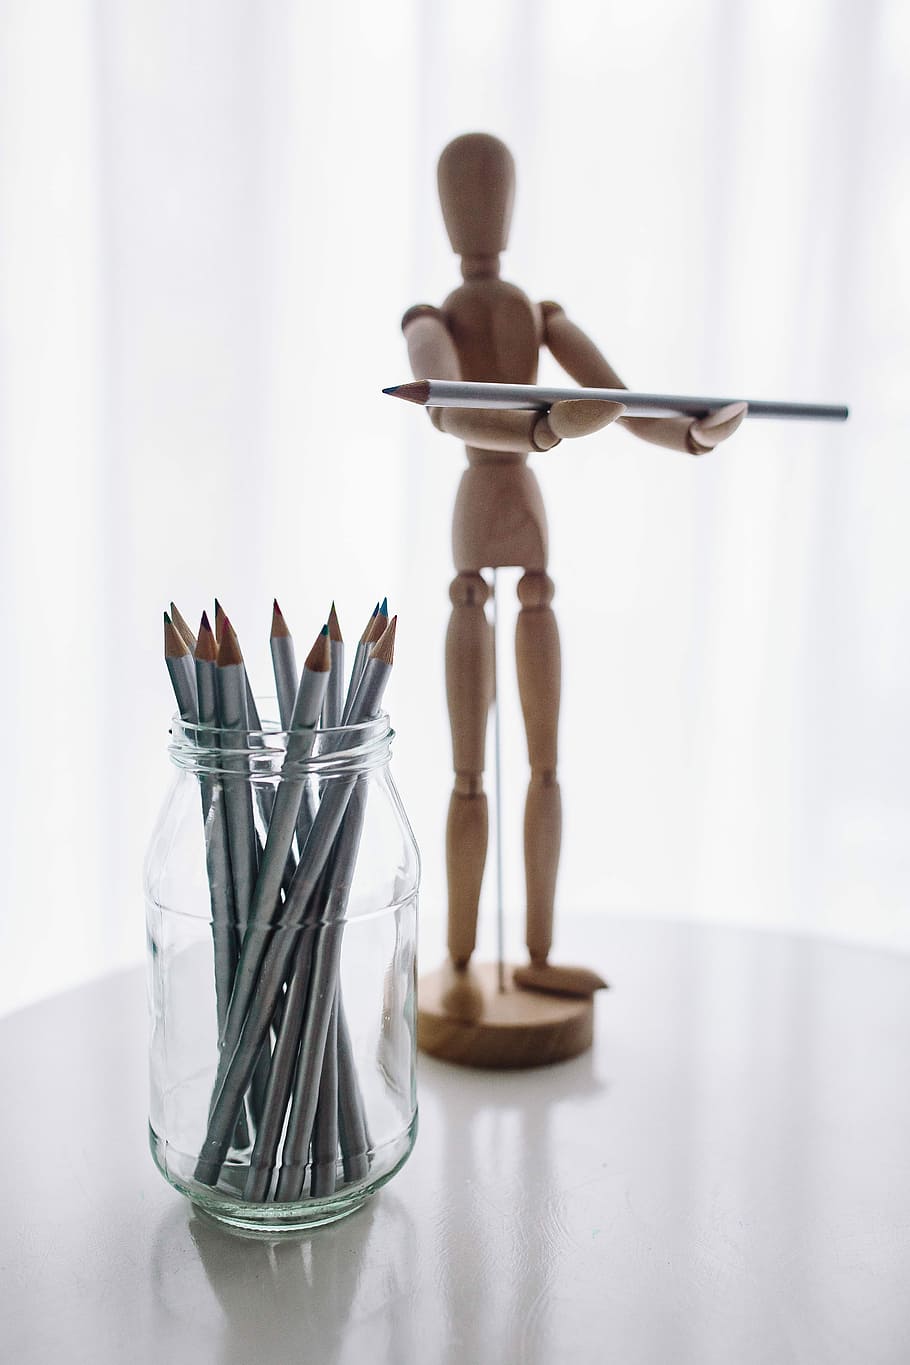 Wooden mannequin in various poses, hand, model, yarn, pencils